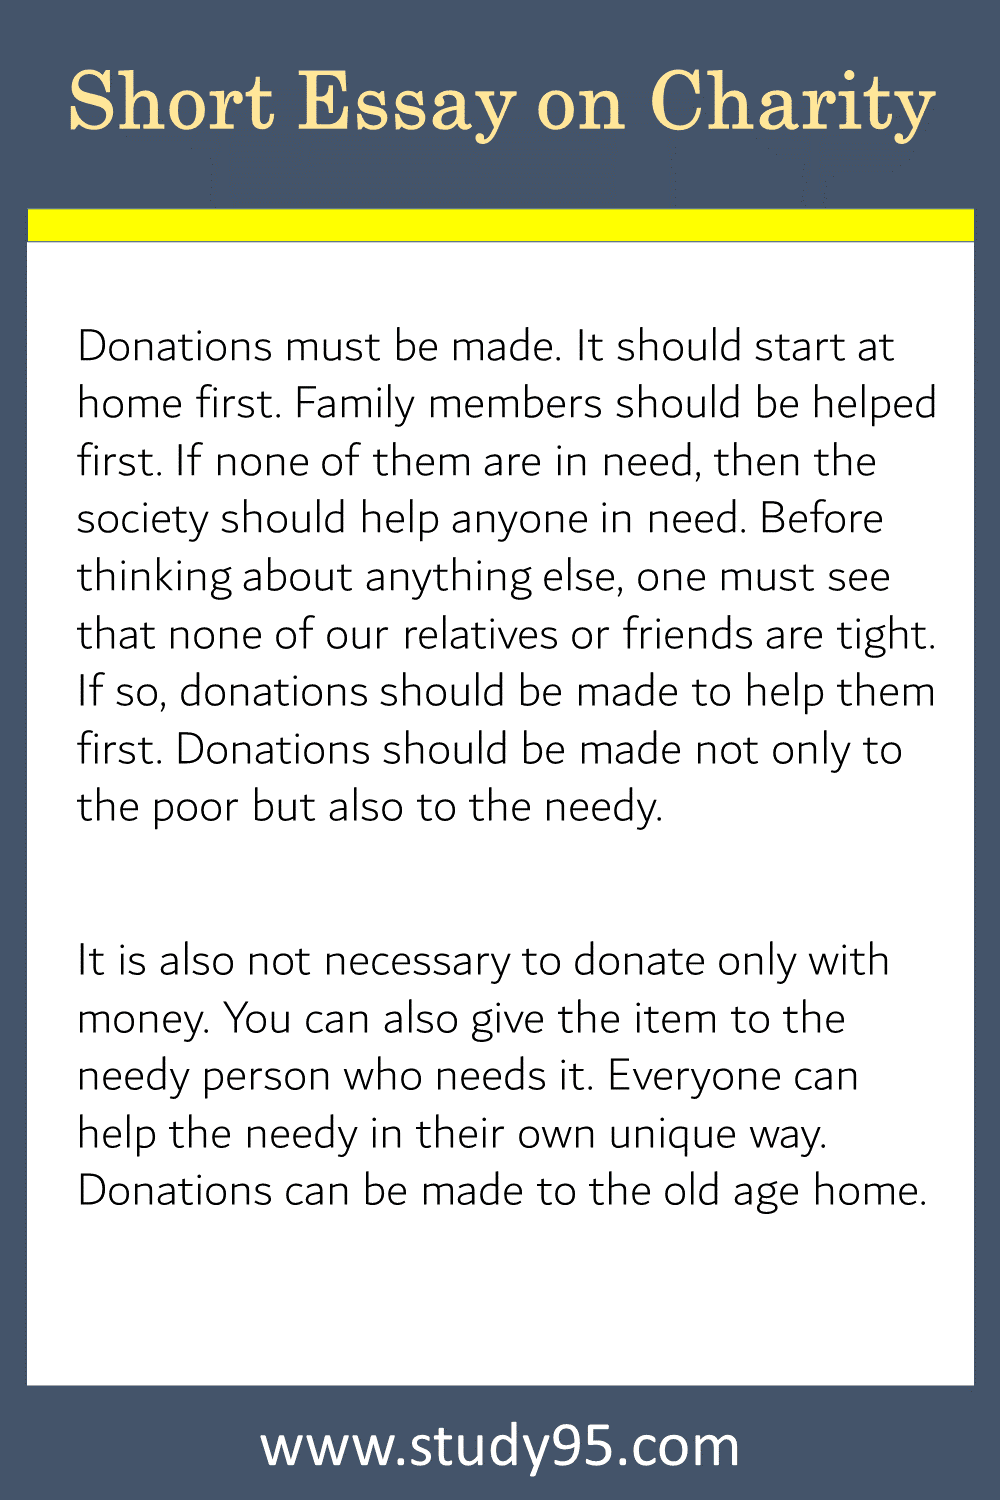 Essay on Charity